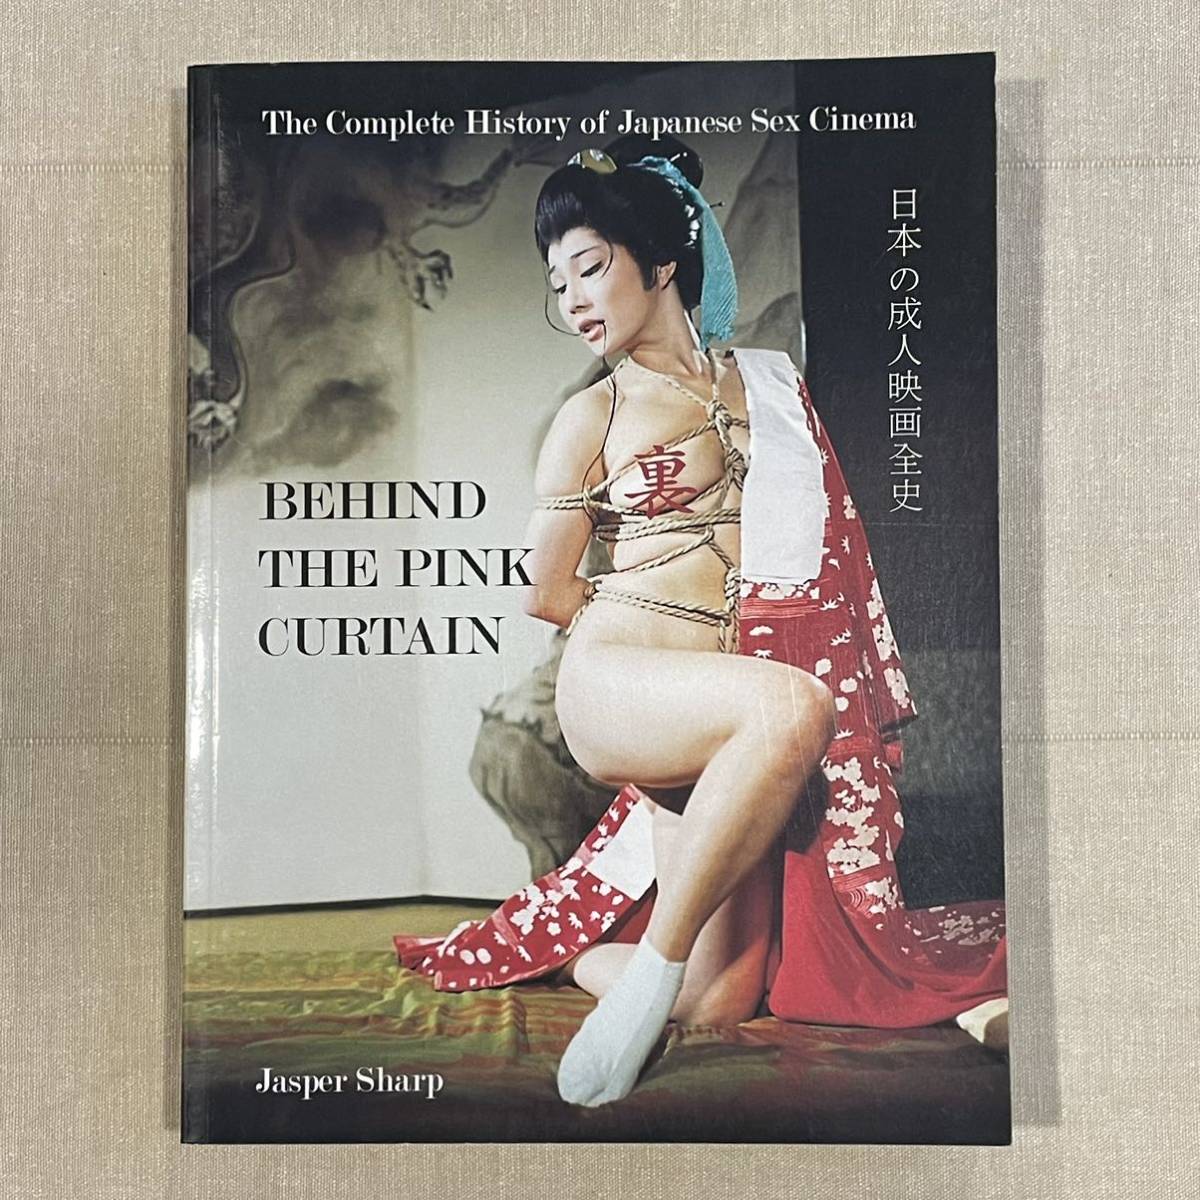 Behind the Pink Curtain: The Complete History of Japanese Sex Cinema 日本の成人映画全史 洋書